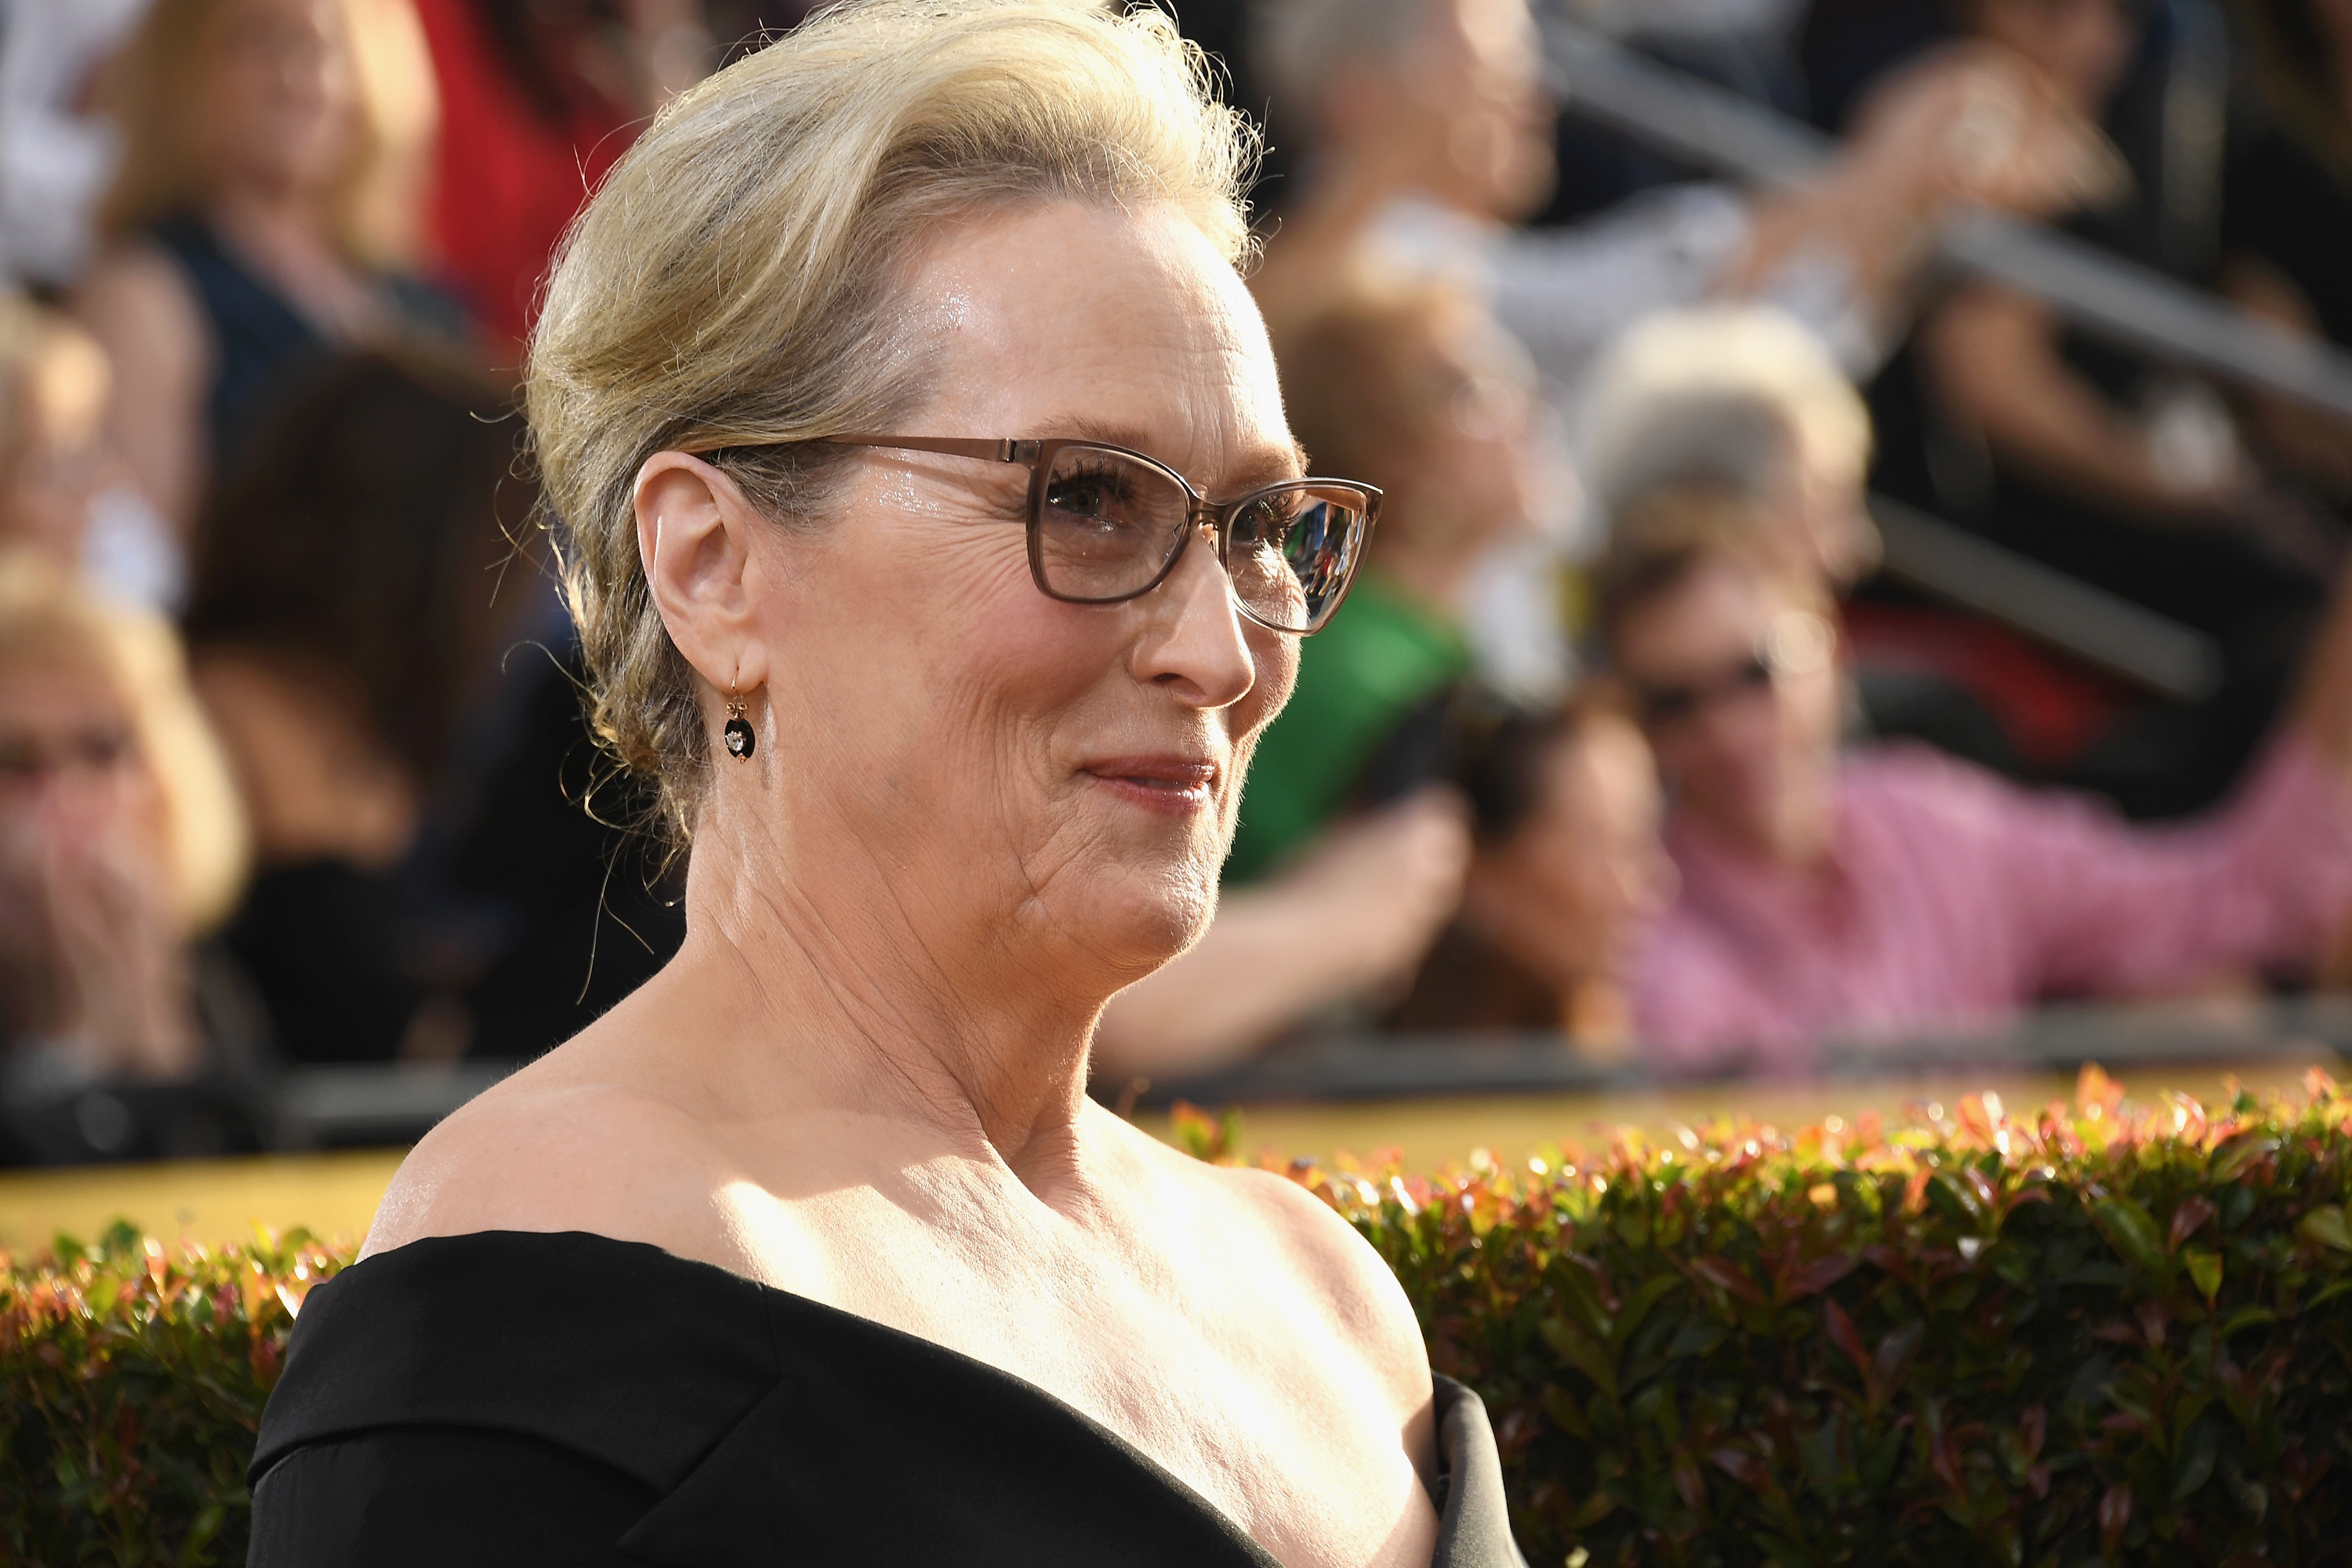 Meryl Streep arrives to the 75th Annual Golden Globe Awards held at the Beverly Hilton Hotel on Jan. 7, 2018. (Kevork Djansezian/NBC—NBCU Photo Bank via Getty Images via Getty Images)